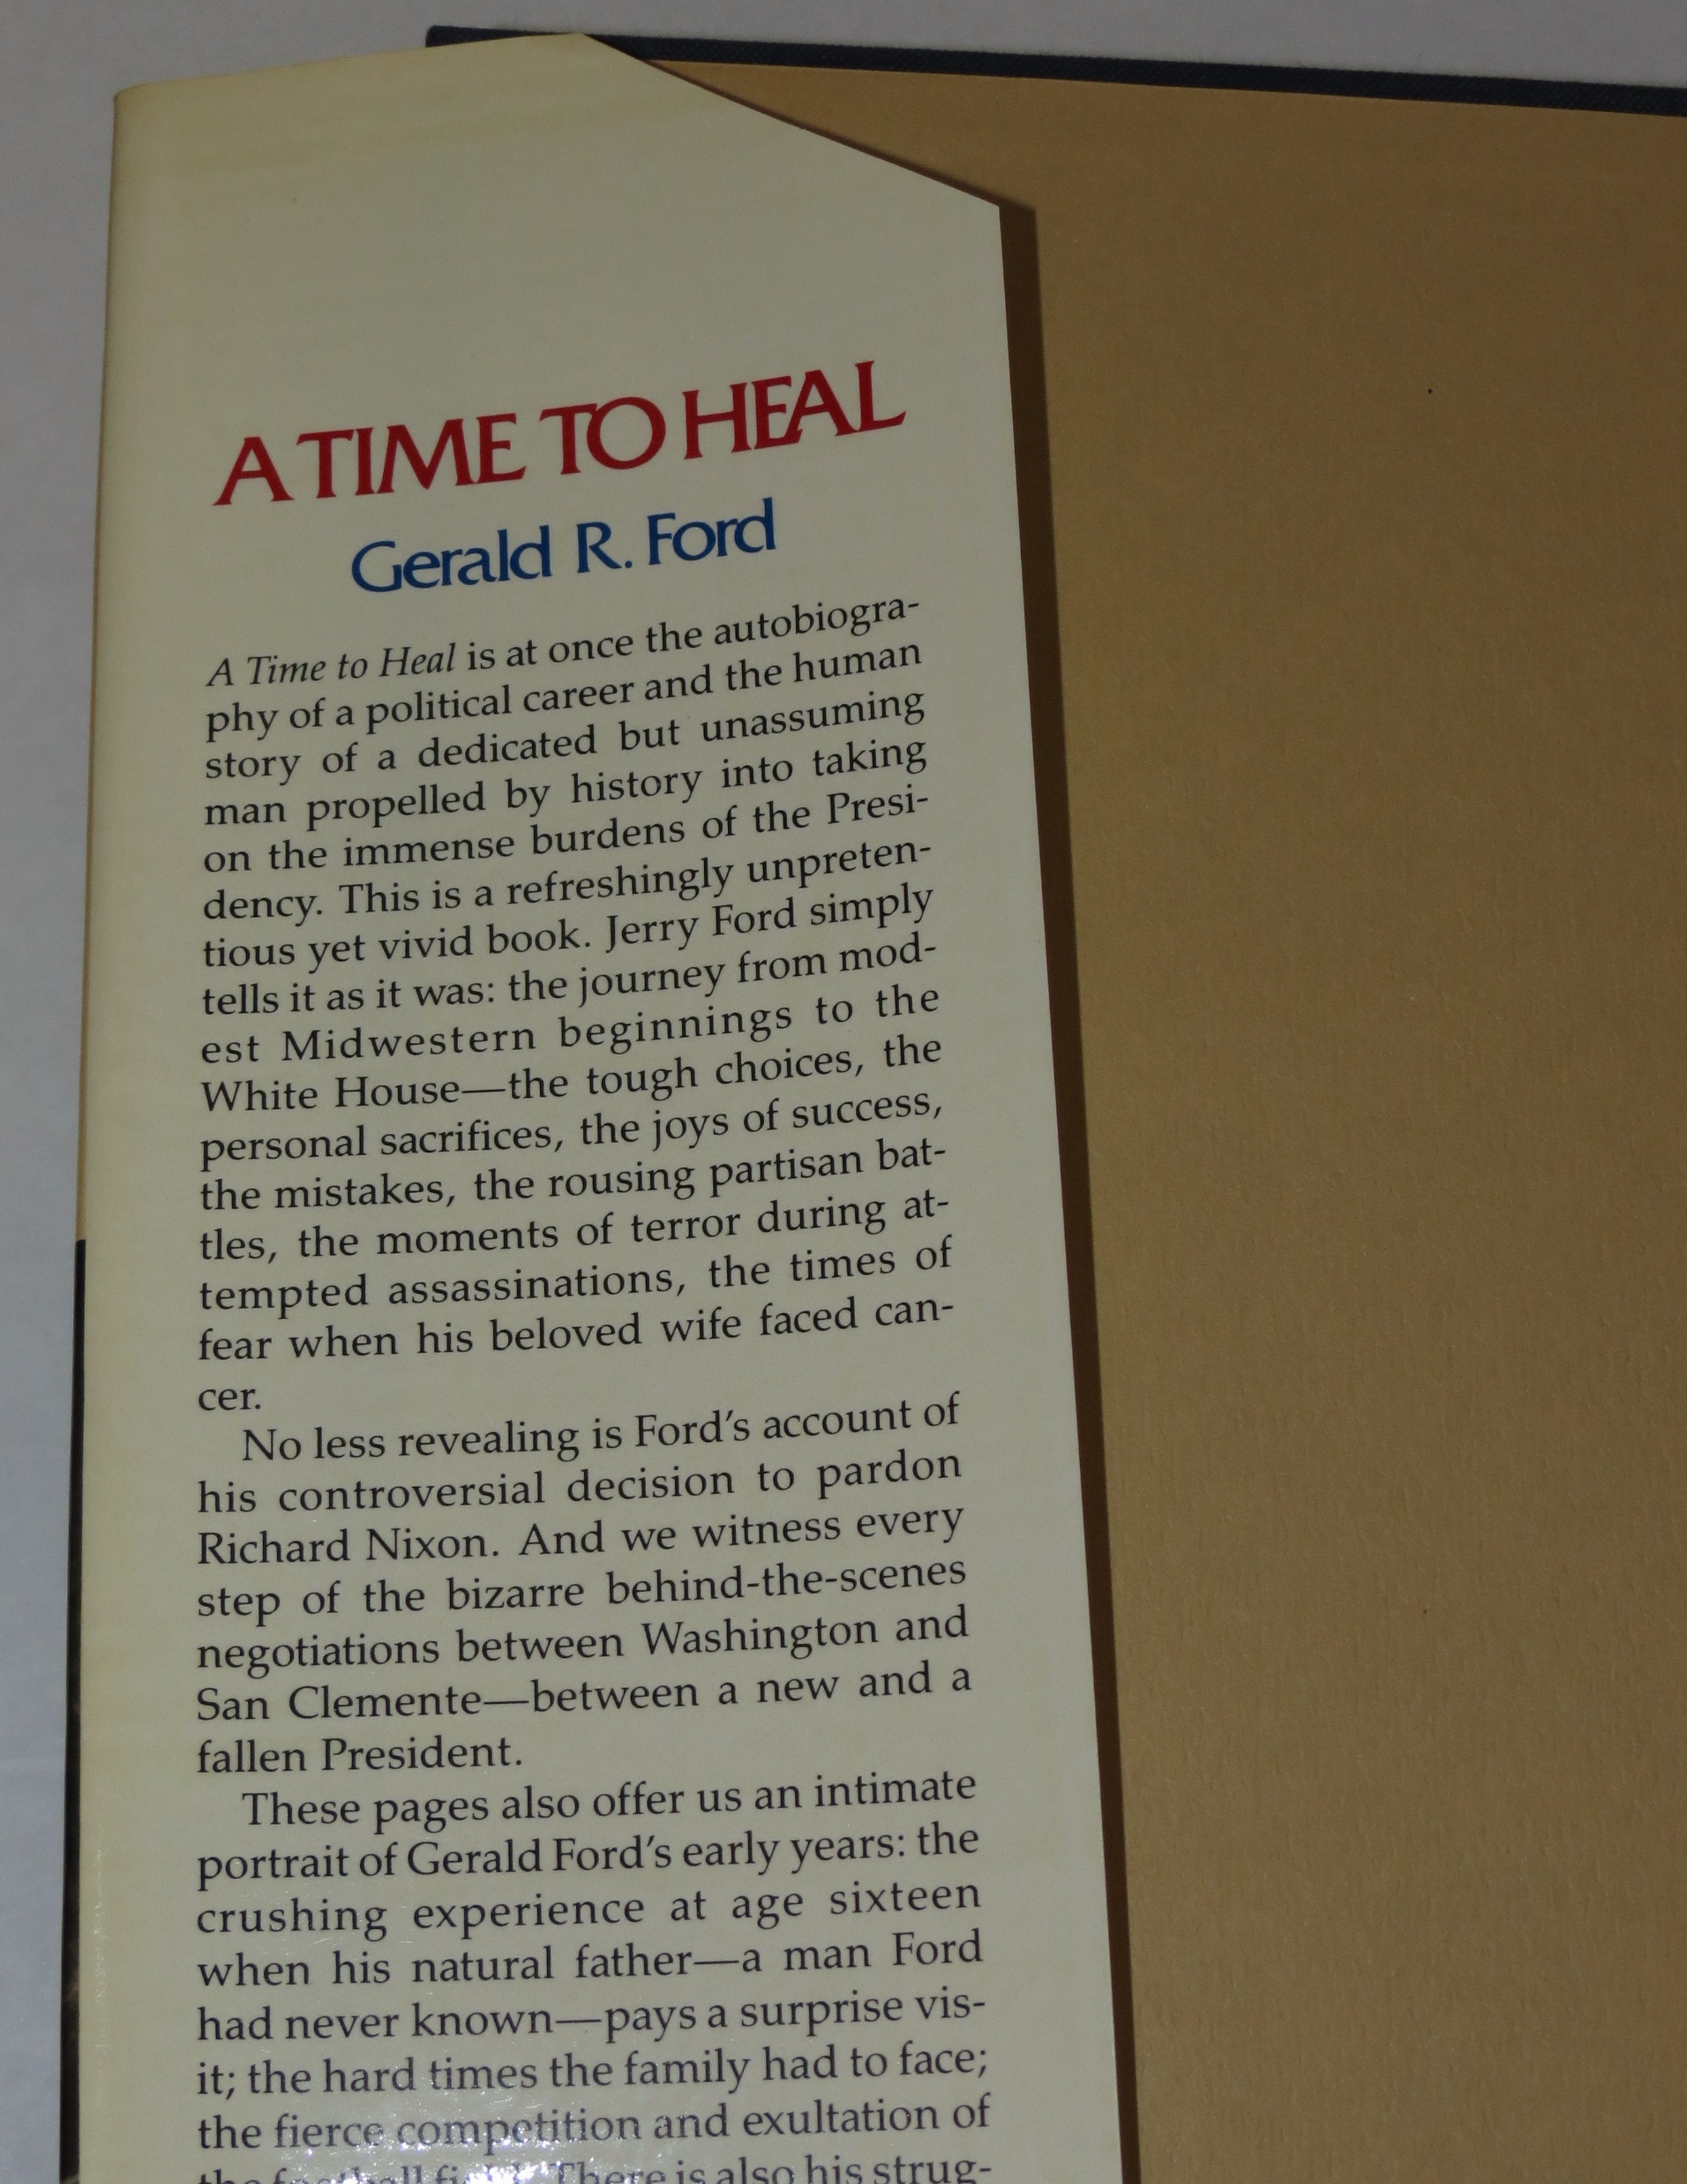 A time to heal the autobiography of gerald ford #6